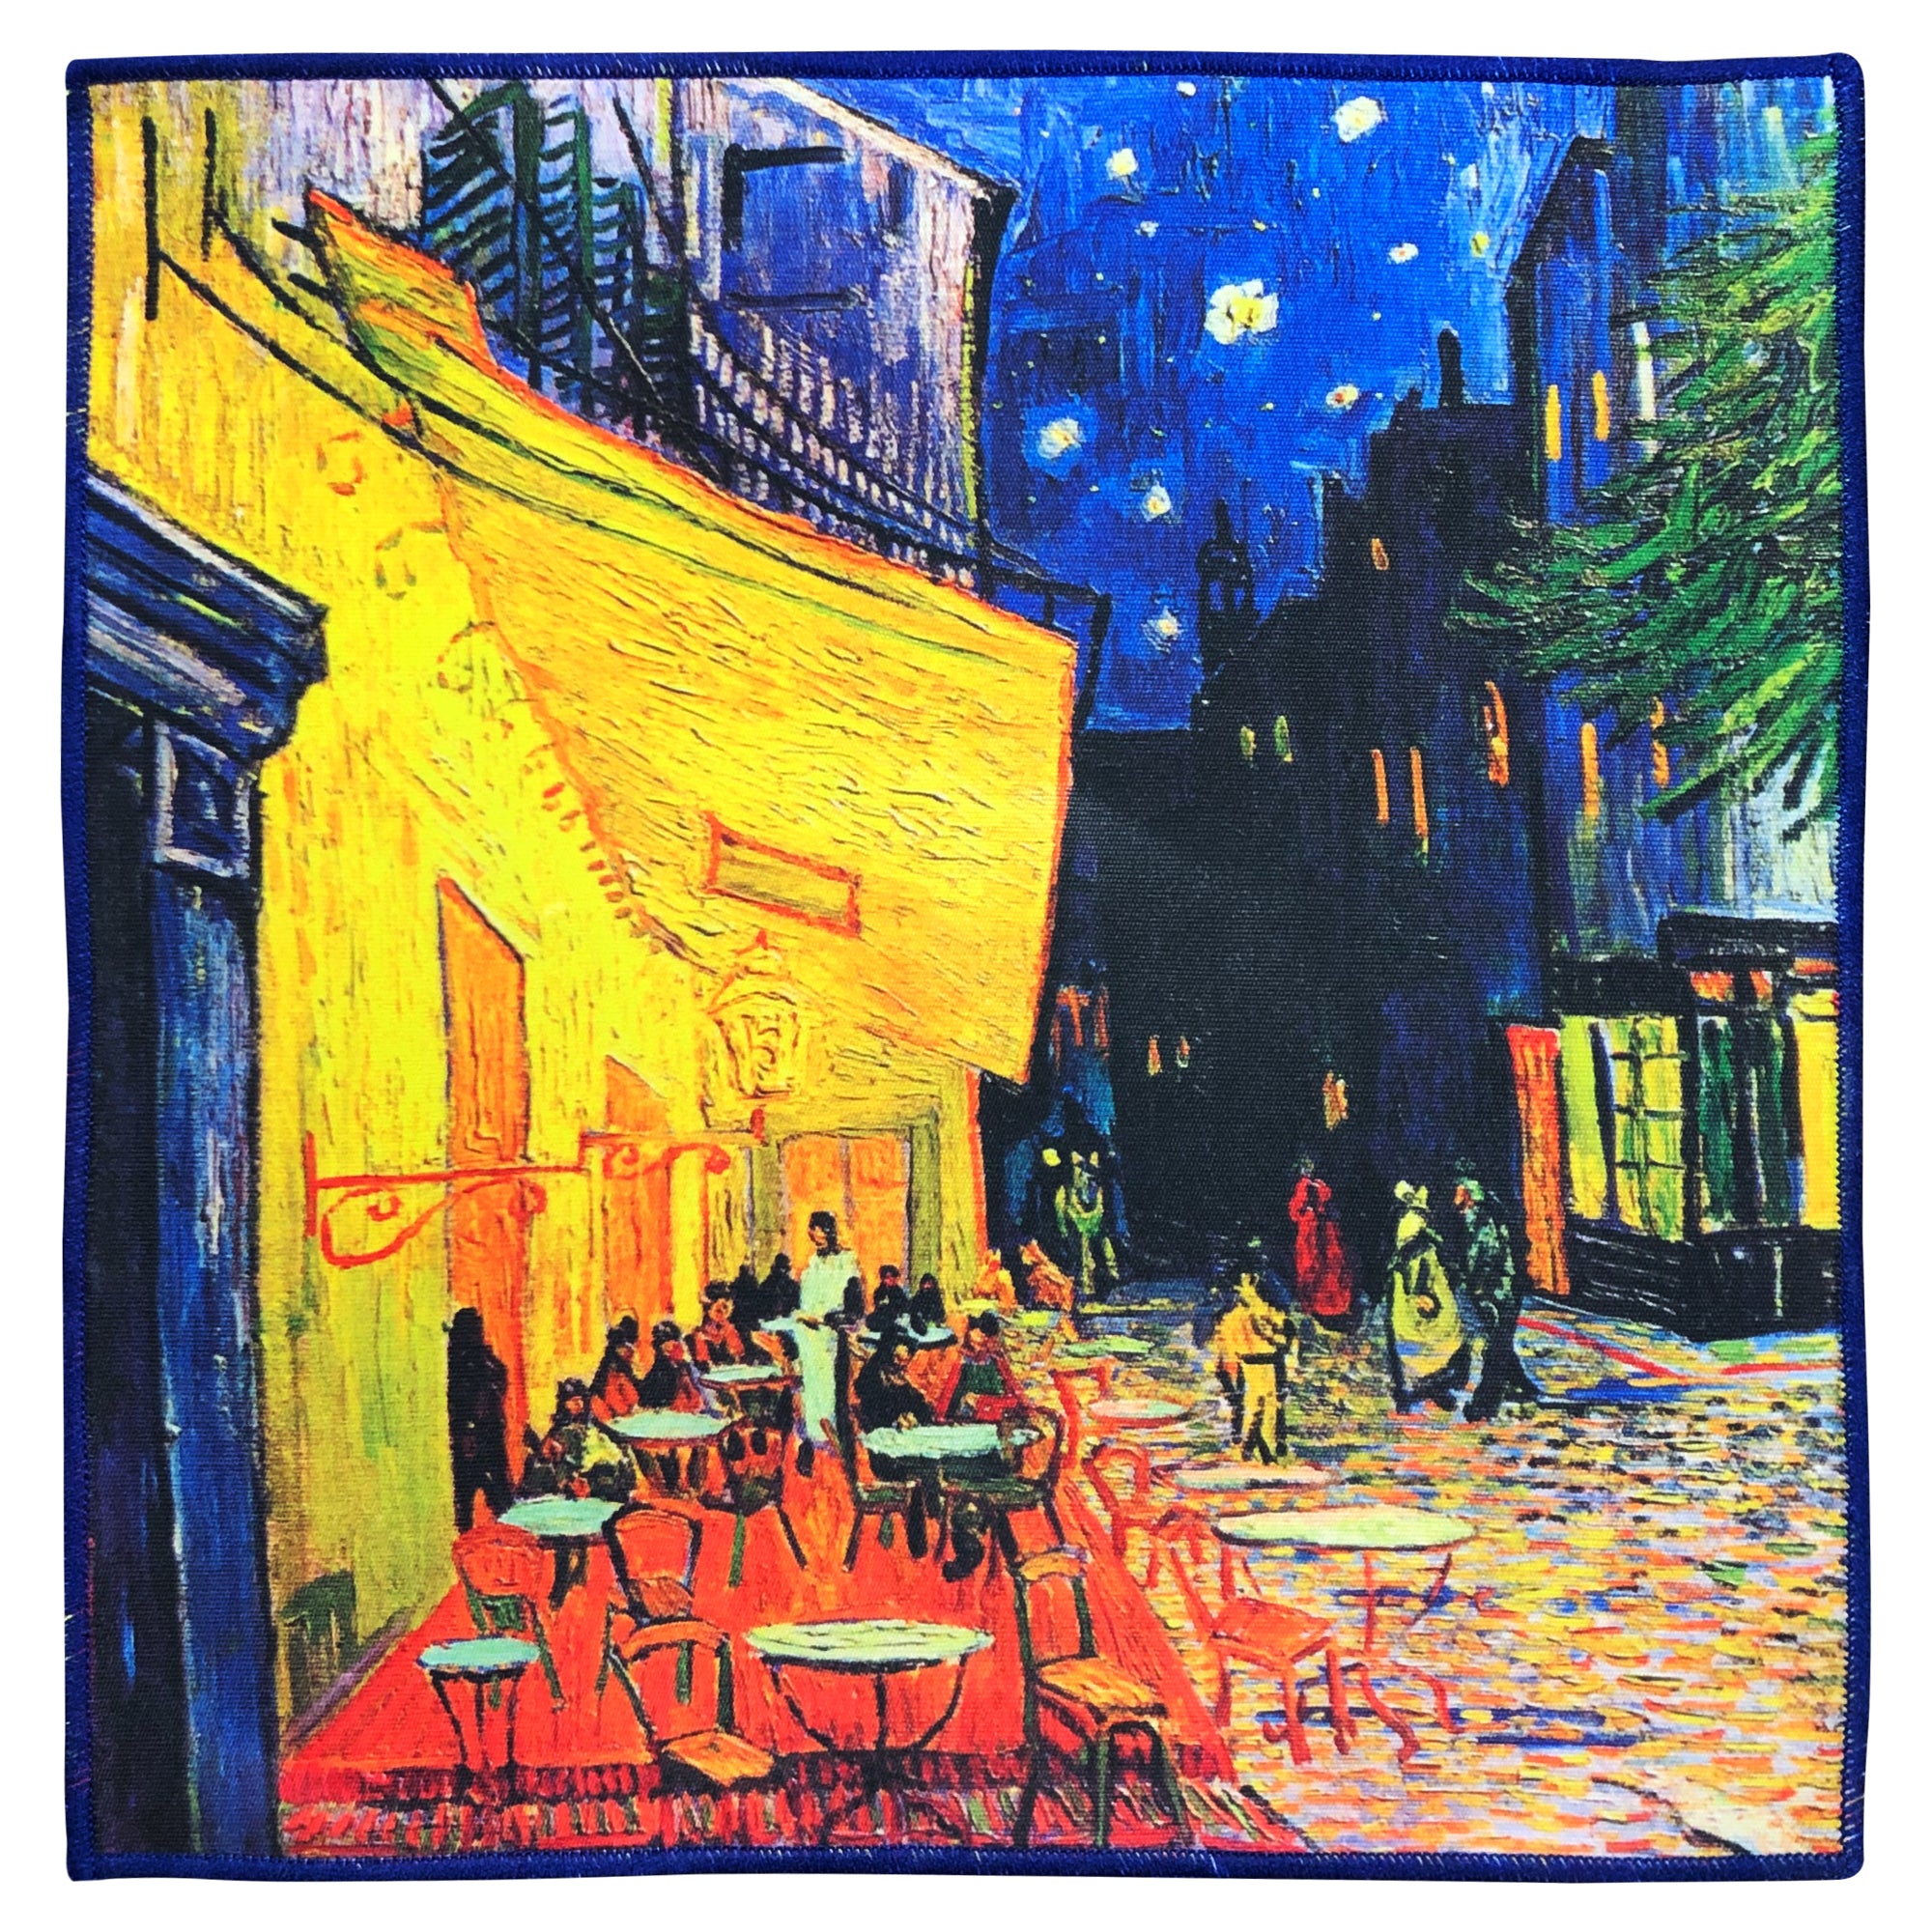 [6 Pack] Vincent Van Gogh "Café Terrace at Night" - Art Collection - Ultra Premium Quality Microfiber Cleaning Cloths